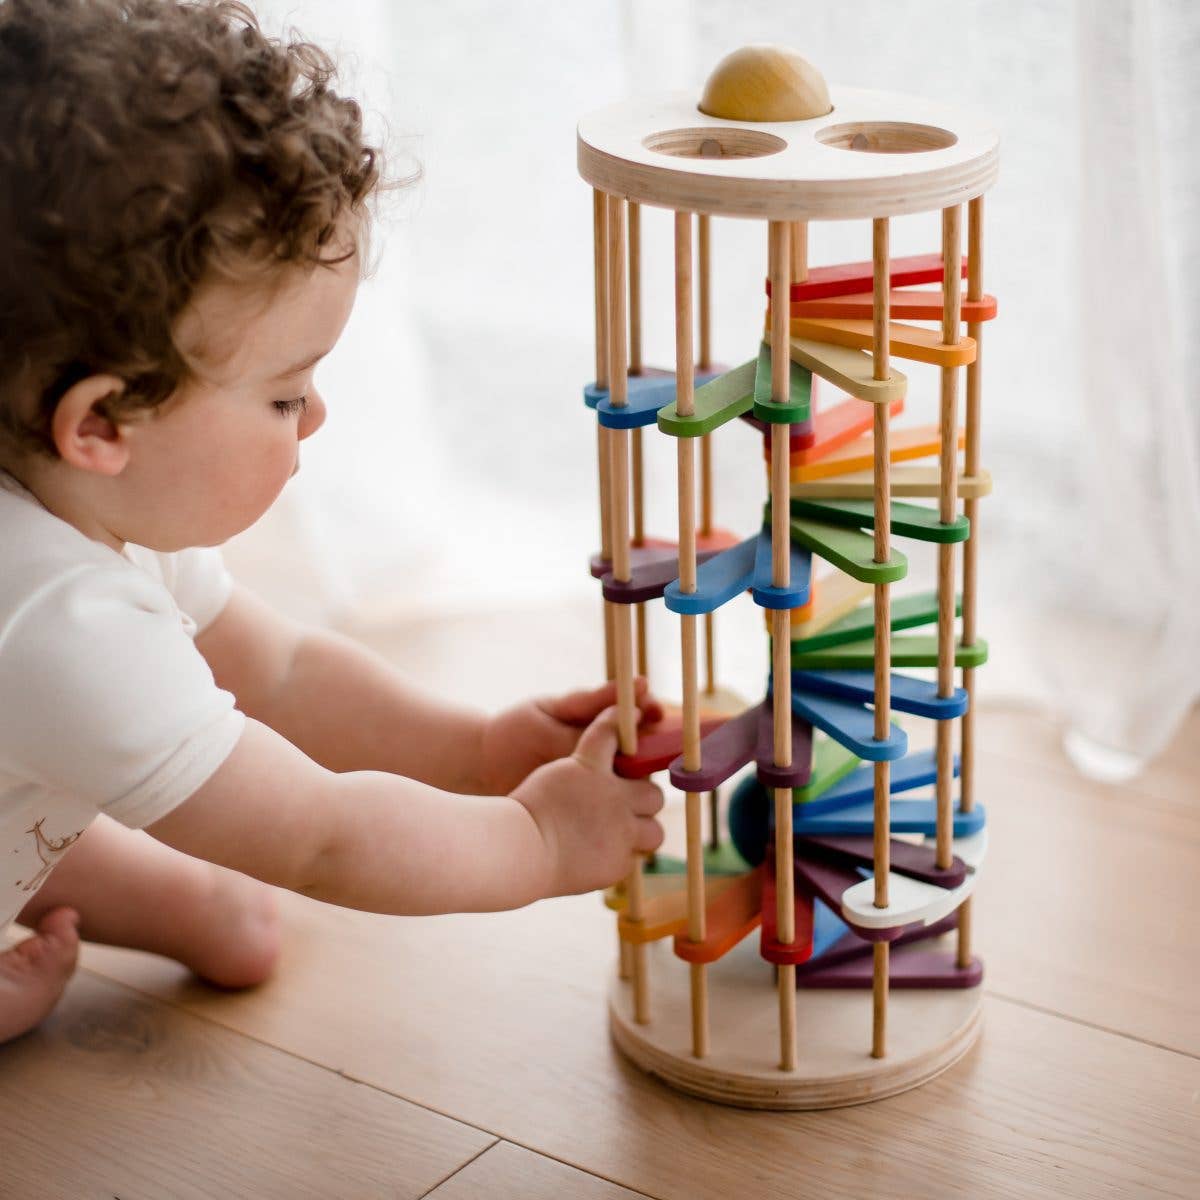 Pre-Order Q Toys Pound A Ball Tower (Ships in February)